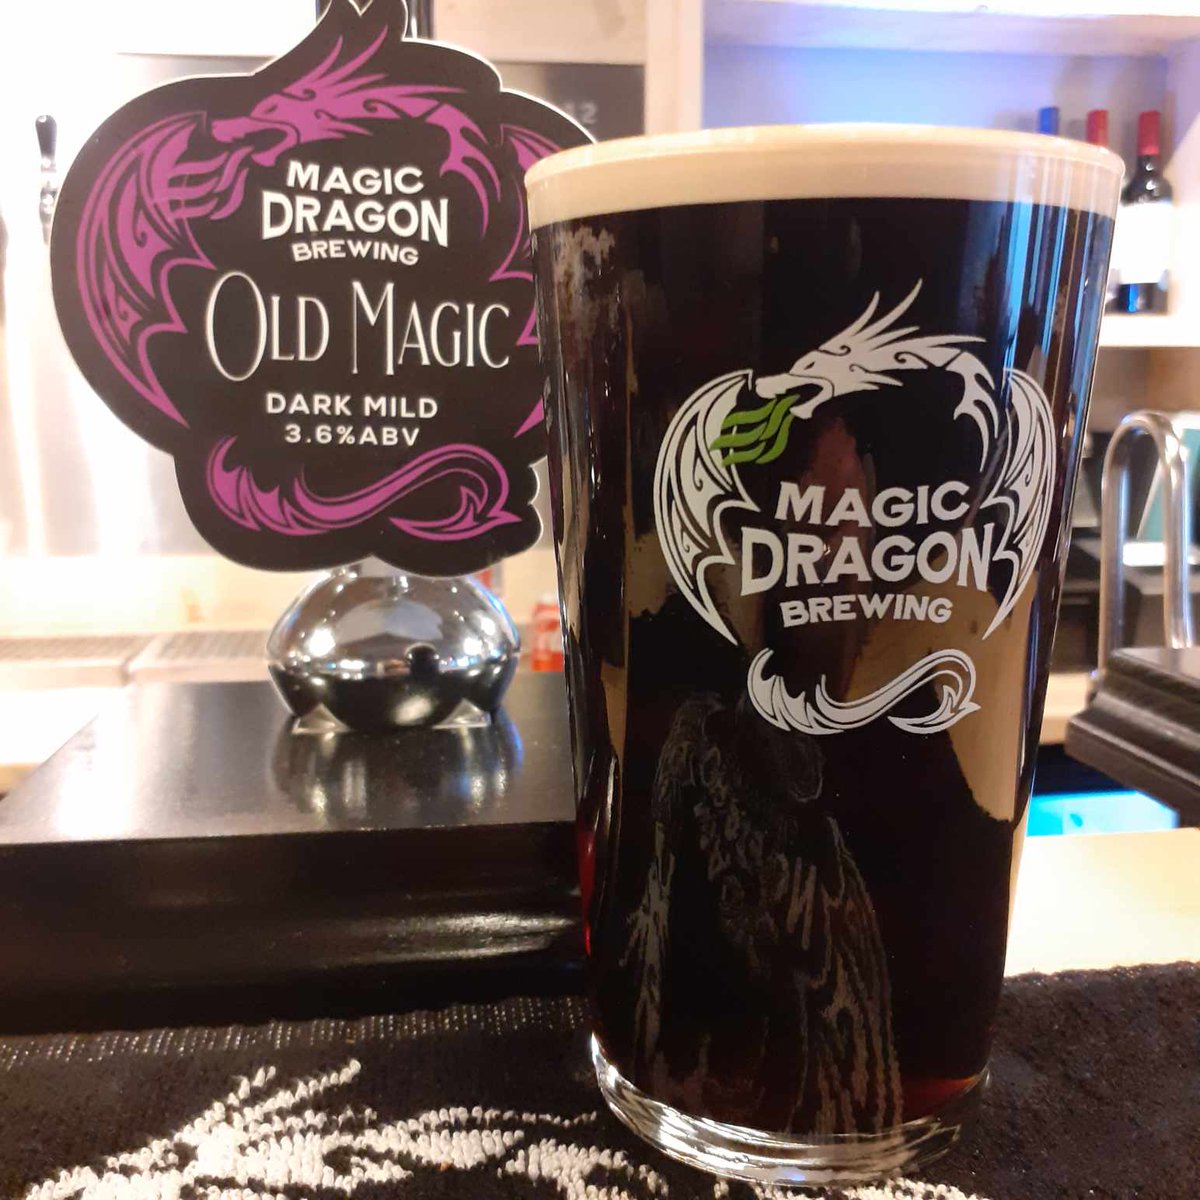 We have the last two weeks of #MildInMay Why not order some award winning Old Magic for your pub? We deliver to North Wales, Shropshire, Cheshire, Manchester and Liverpool!
#MildMonth #realalepub #publife #PubTrade #trade